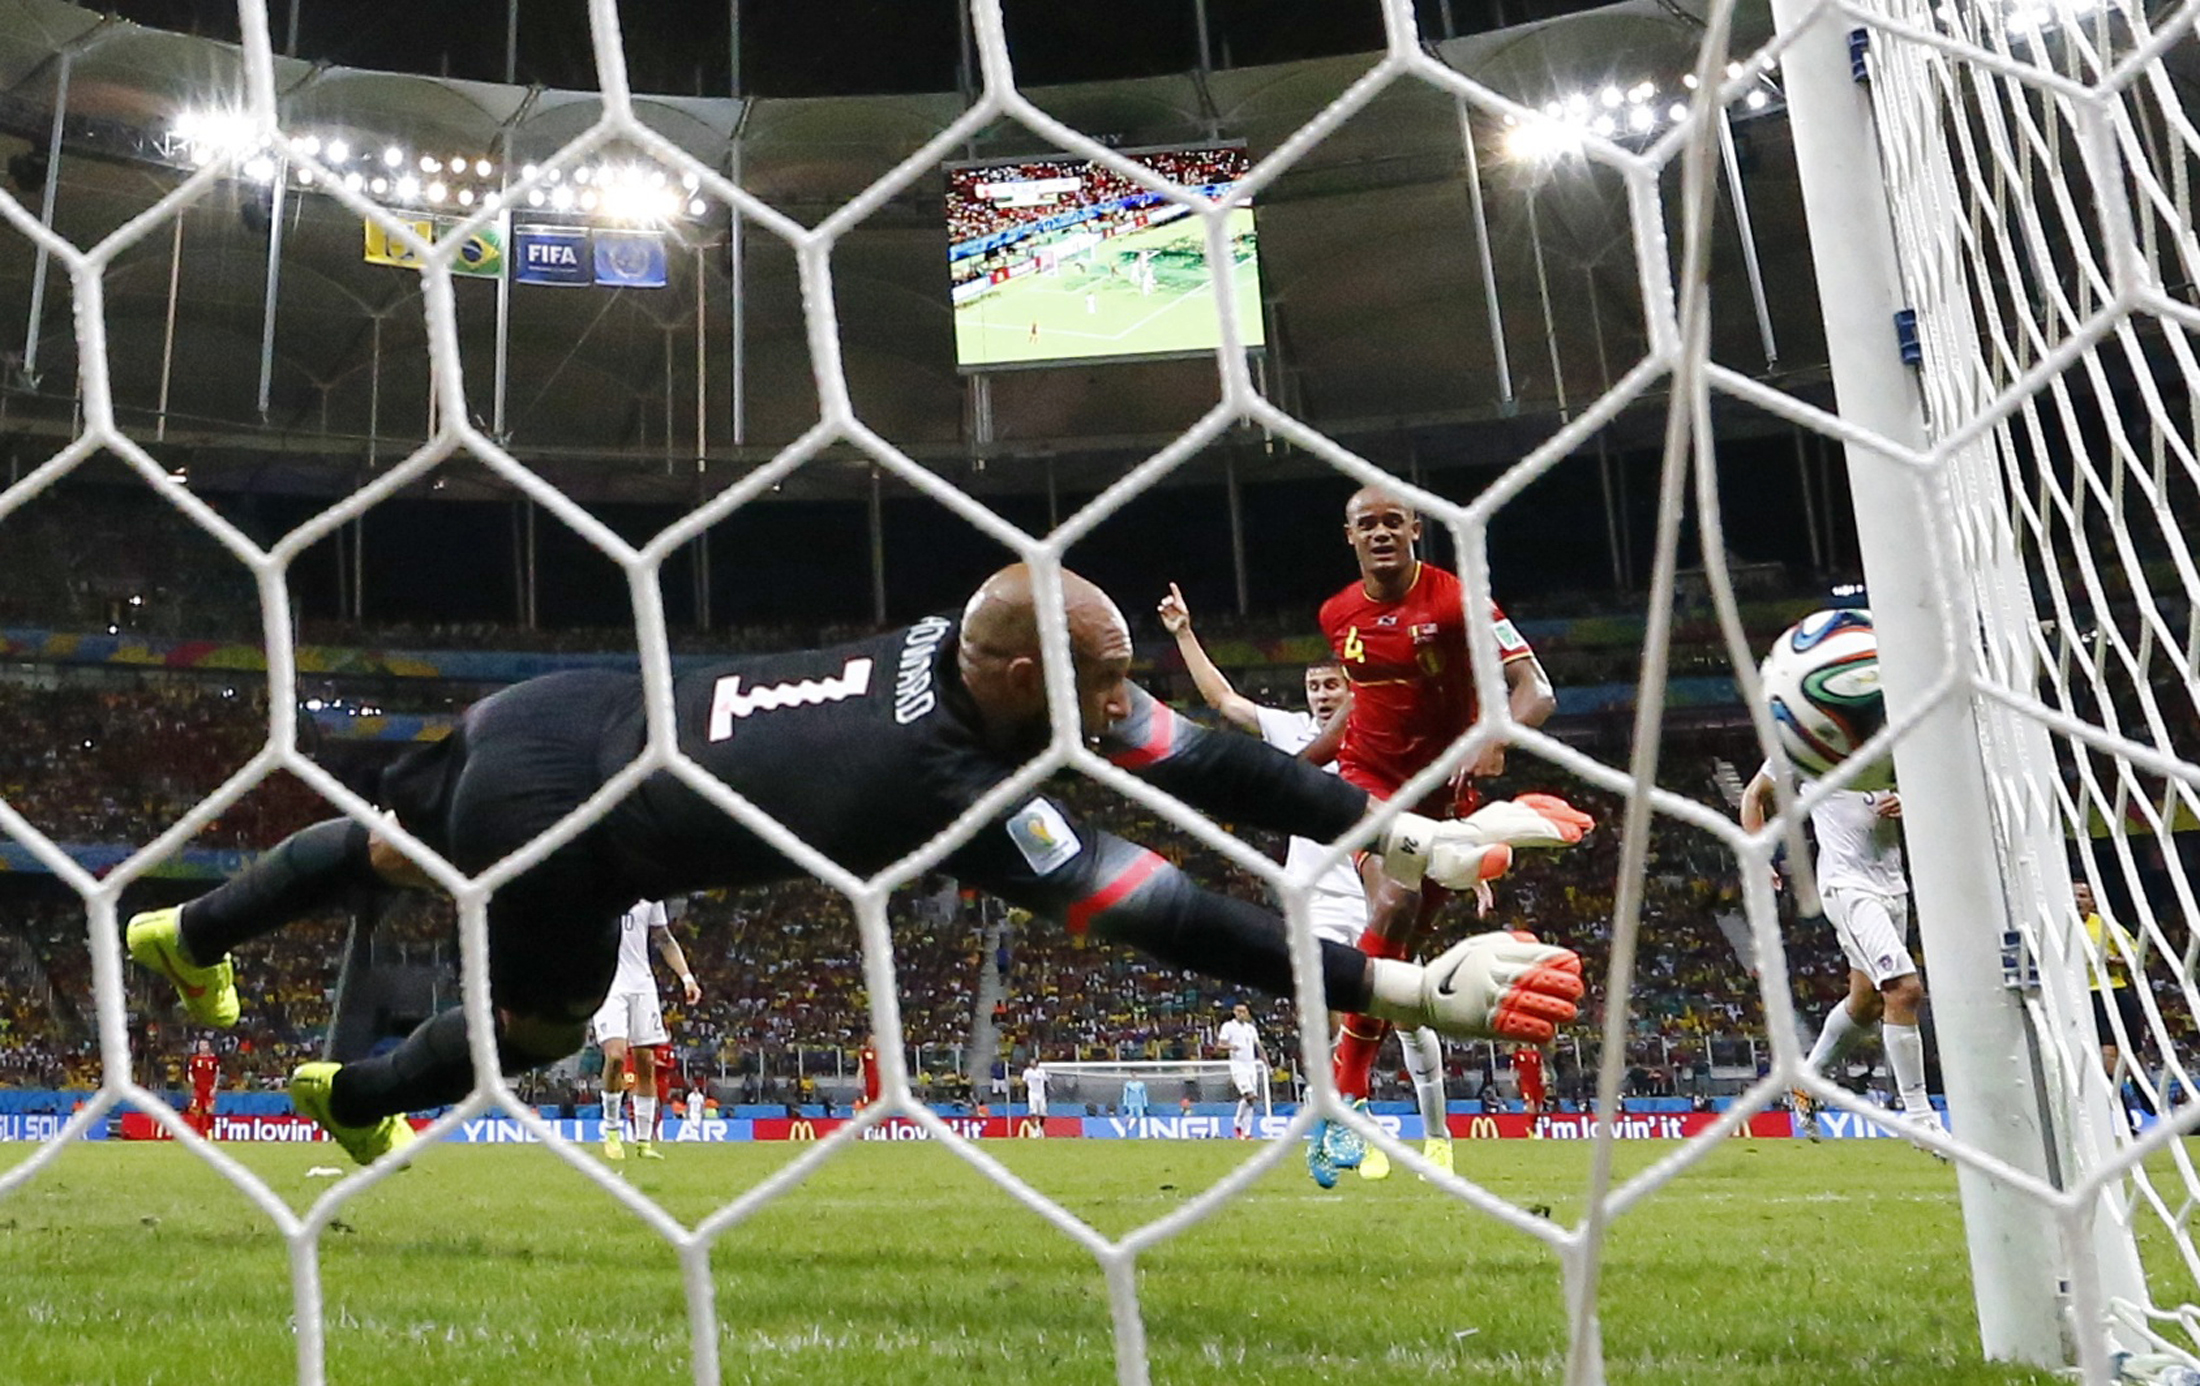 Goalkeeper Howard of the U.S. blocks a shot from Belgium's Kompany during their 2014 World Cup round of 16 game at the Fonte Nova arena in Salvador